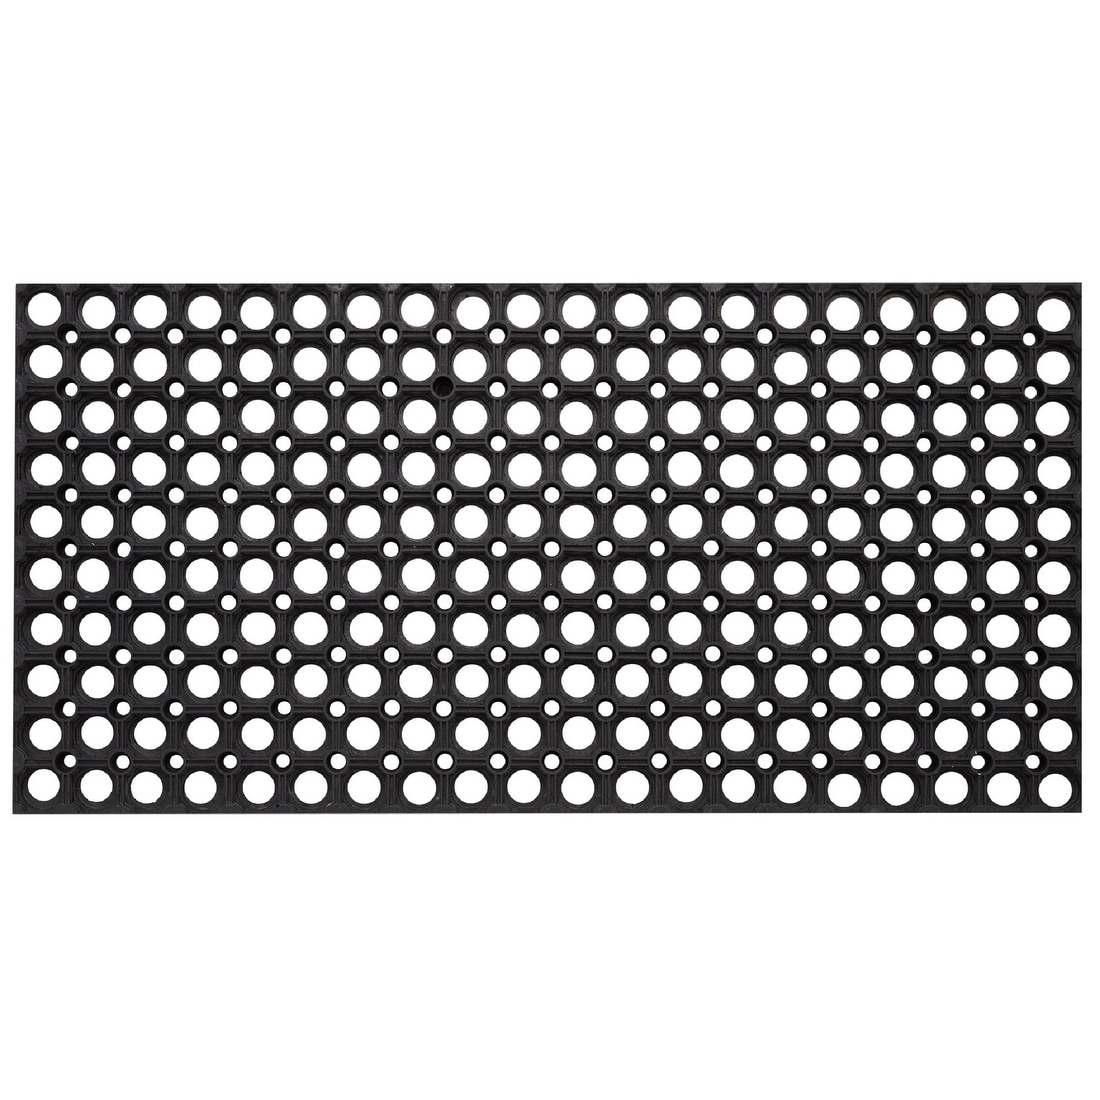 https://ak1.ostkcdn.com/images/products/is/images/direct/6974f7f0ed4e51fb32925e257b9f885e6178bba5/Anti-Fatigue-Perforated-Entrance-Rubber-Floor-Mat%2C-32%22-x-47%22.jpg